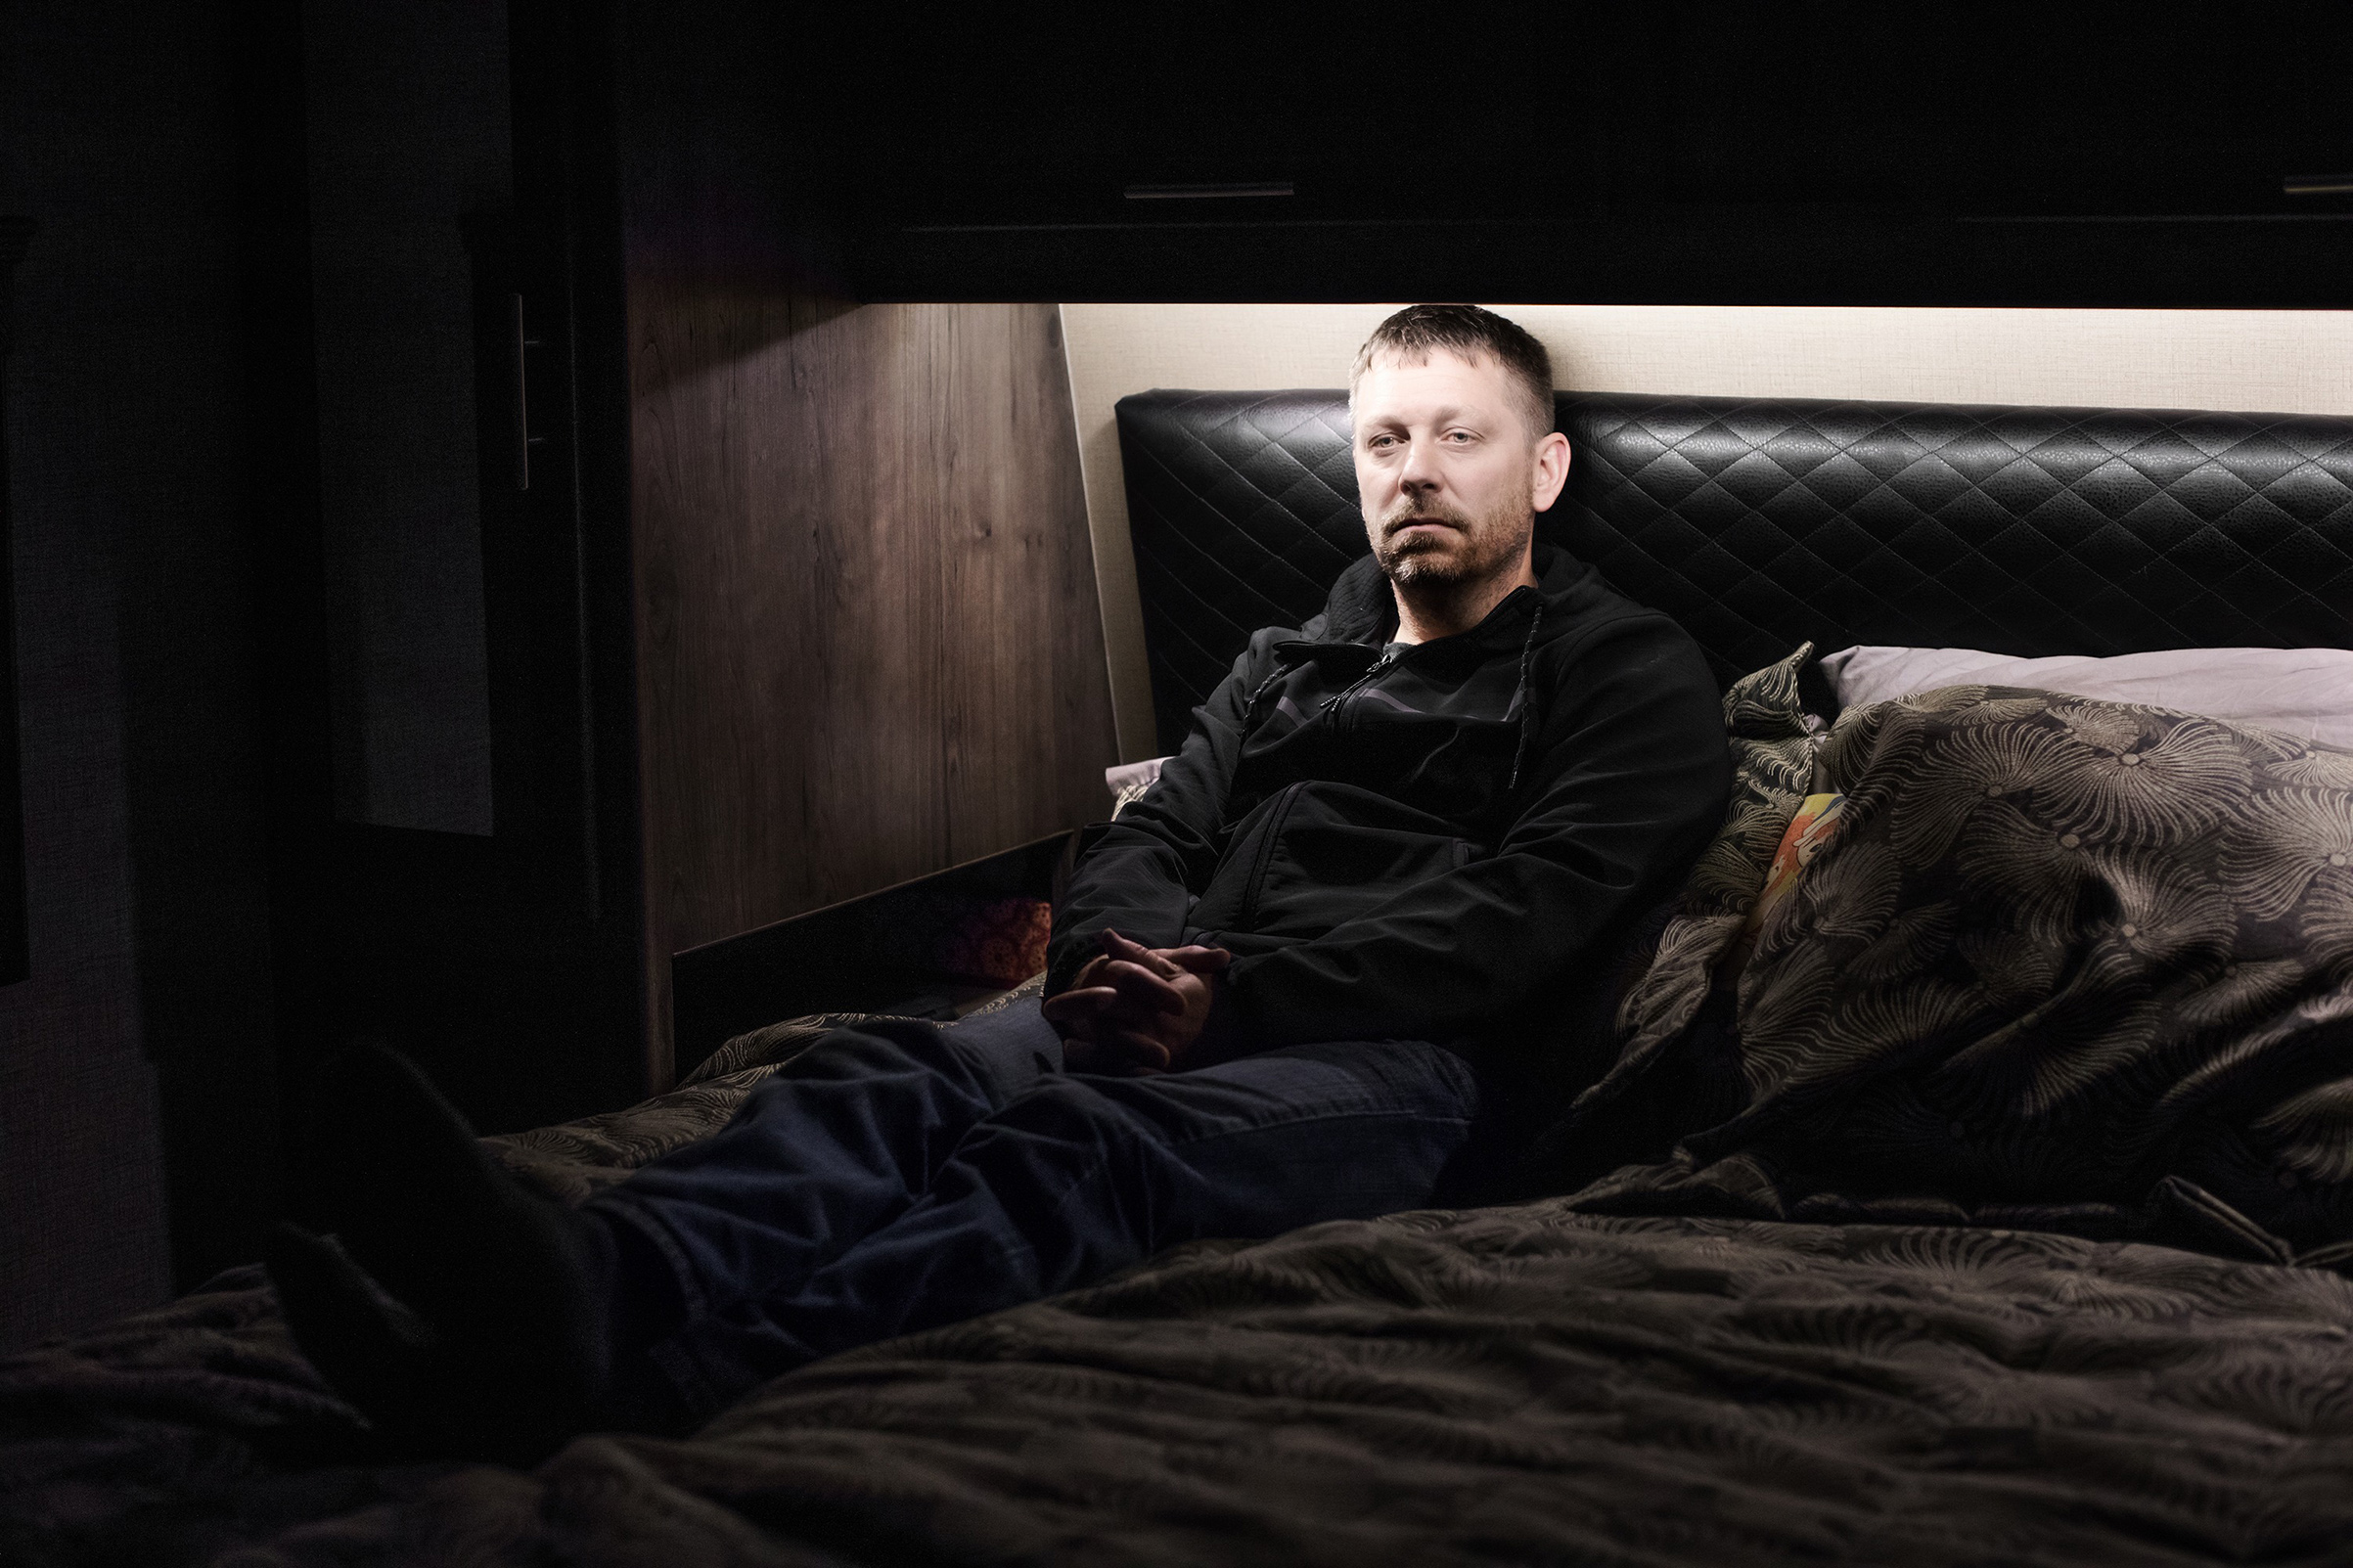 Brown, pictured in an RV where his family stayed after the fire (Philip Montgomery for TIME)